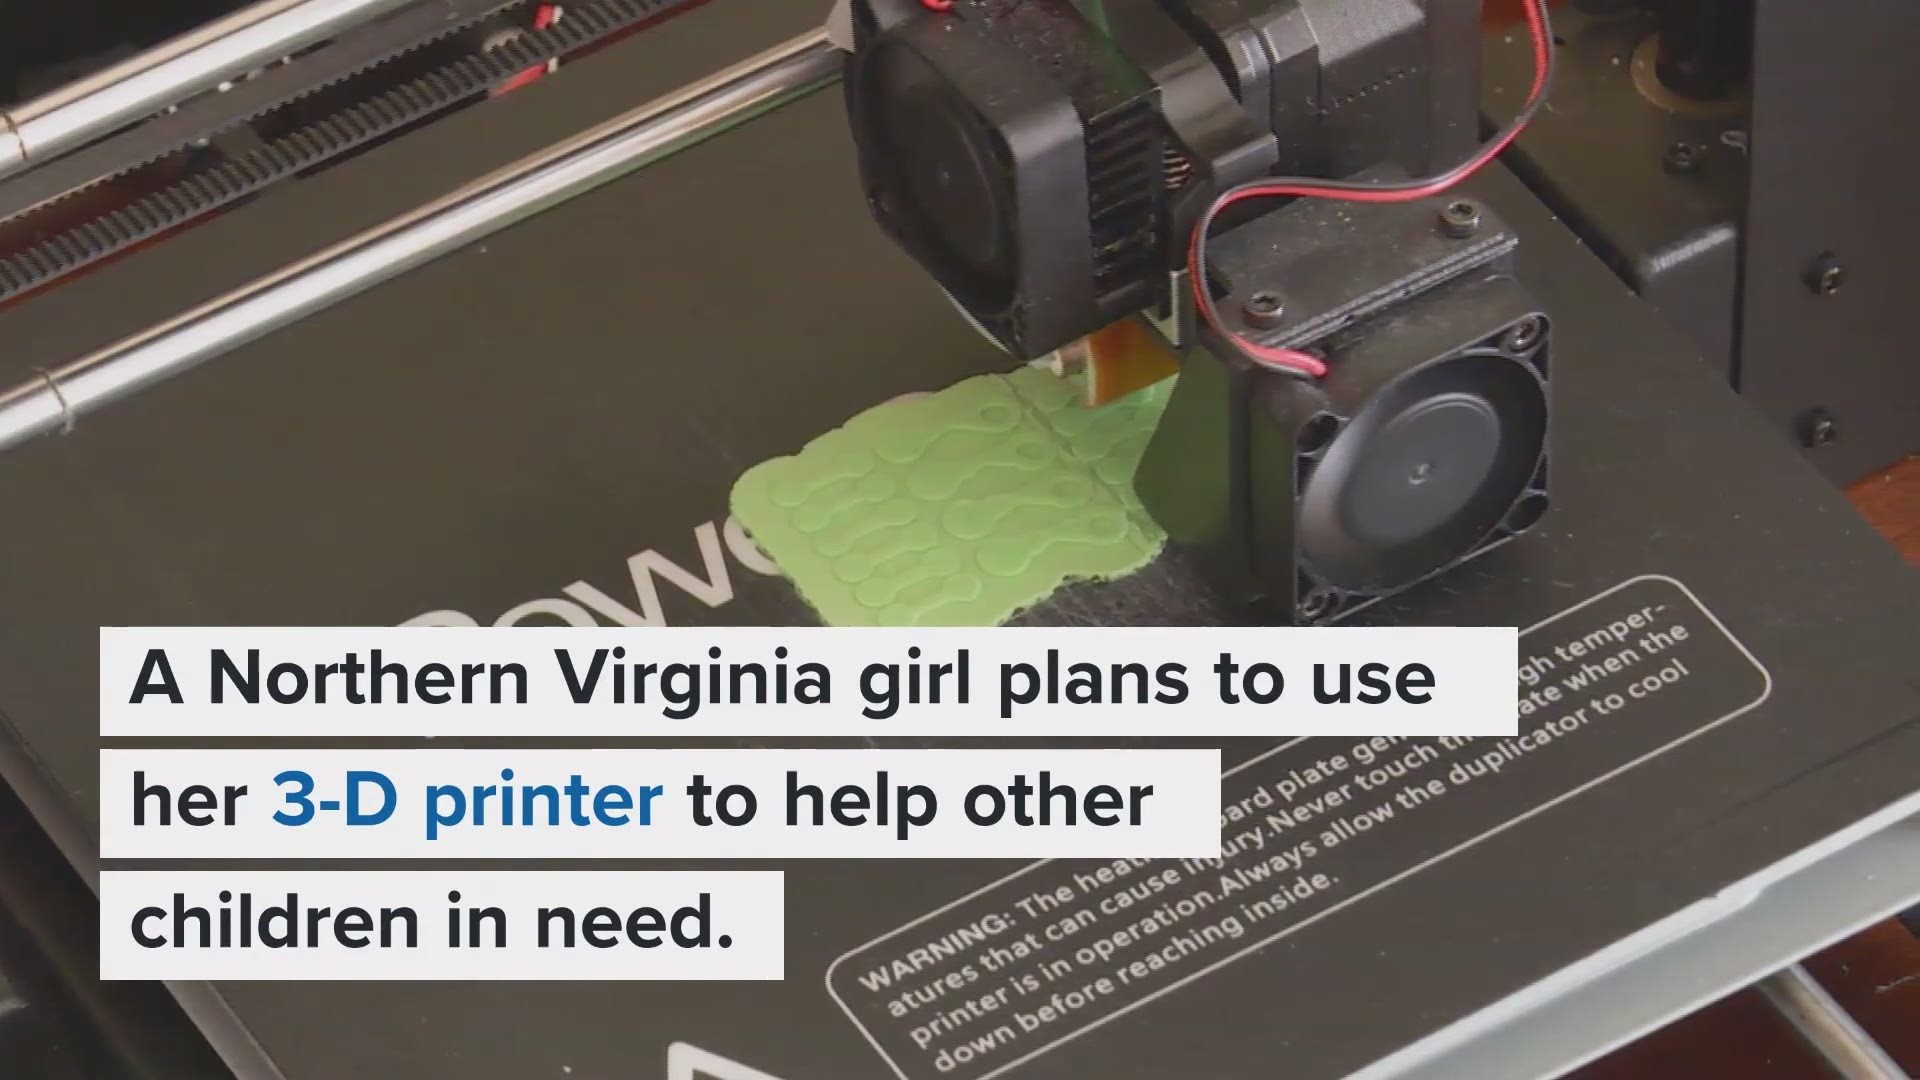 Mahsa Riar, 12, of Loudoun County, plans to print prosthetic limbs to help children in need.